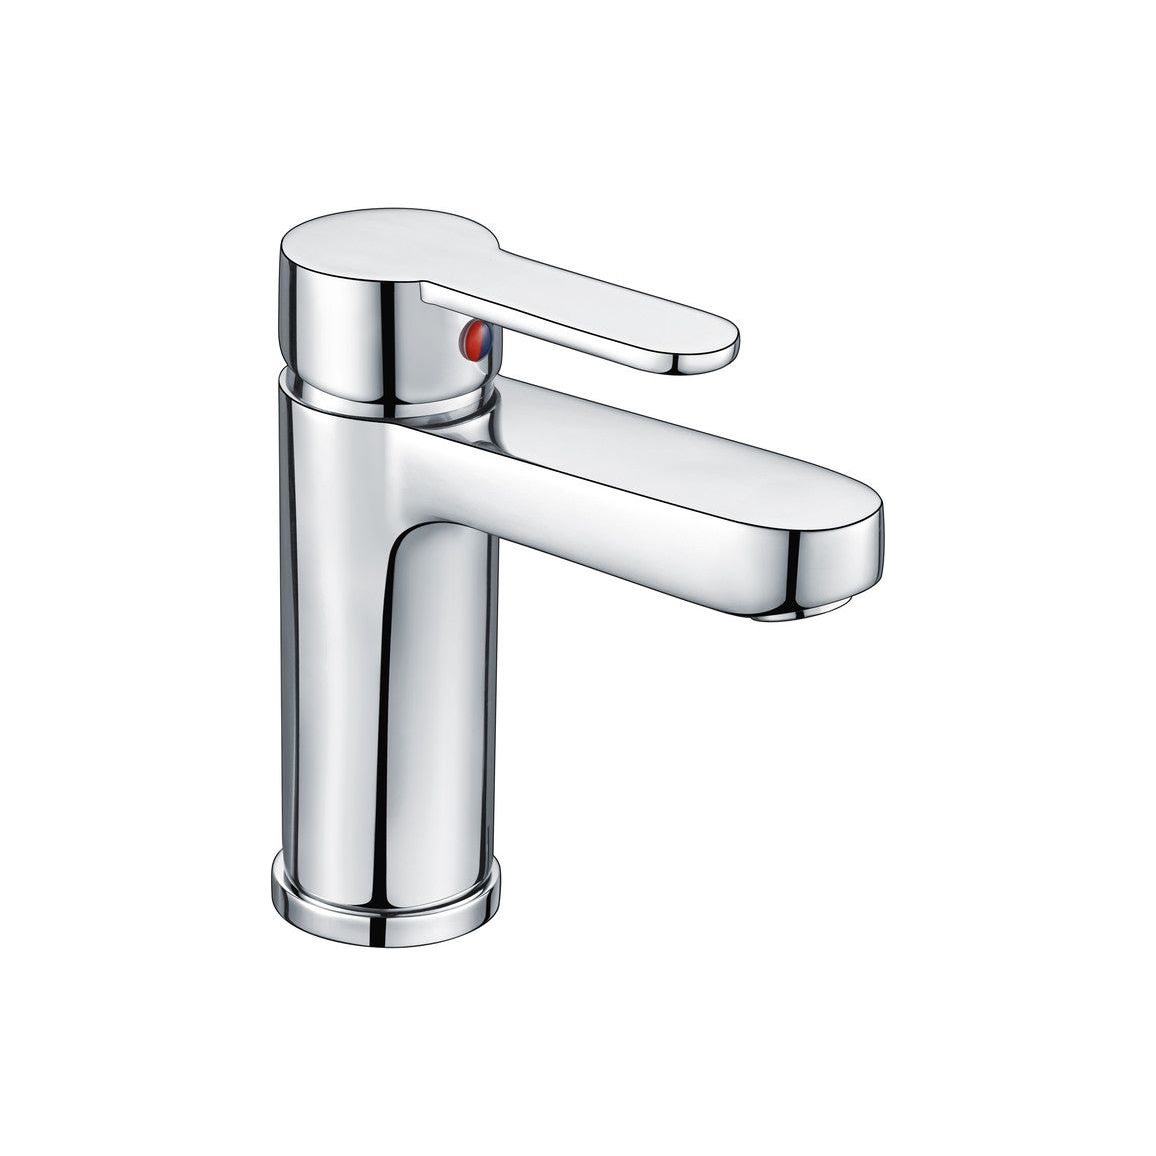 Crowther Basin Mixer & Waste - Chrome